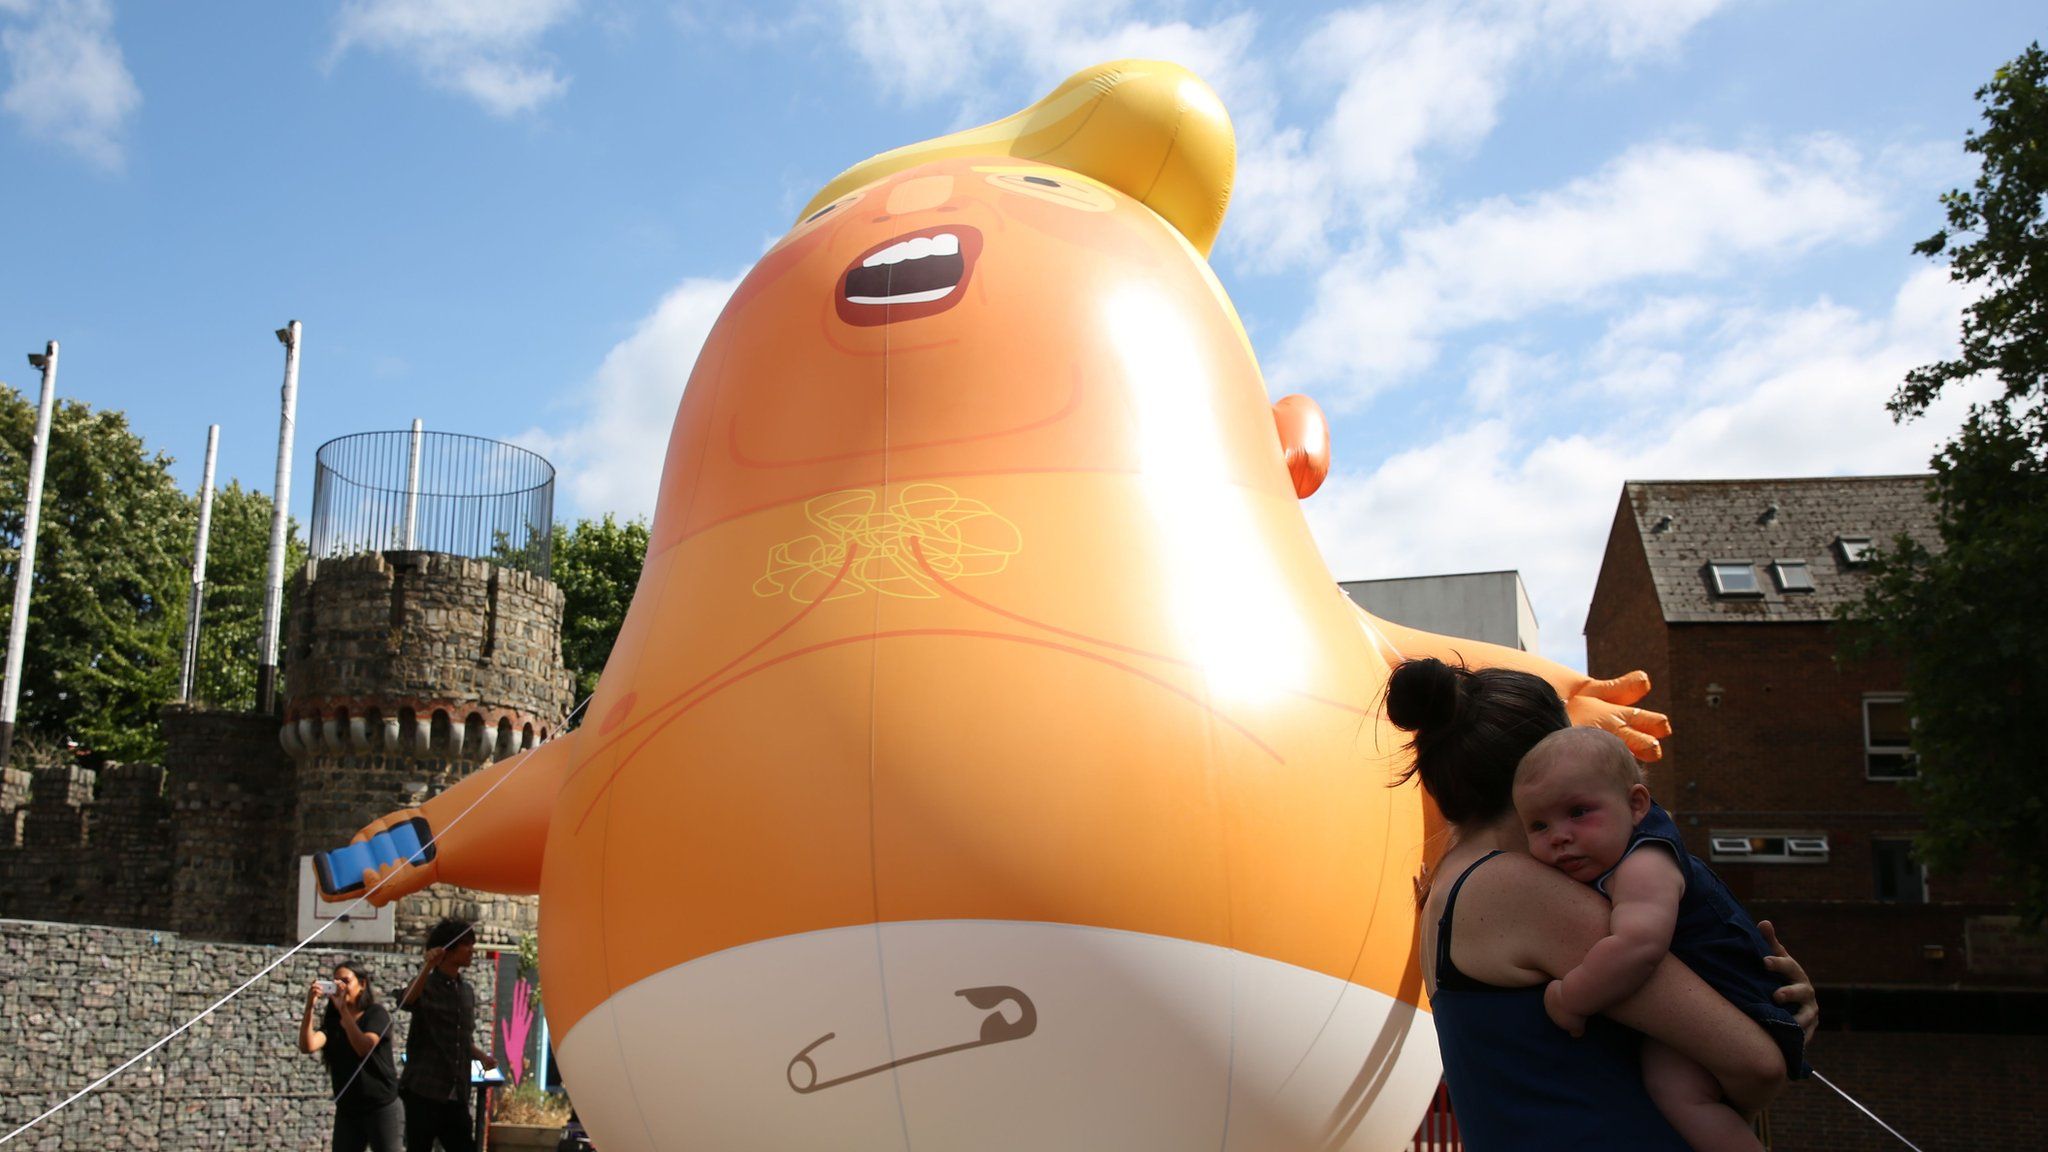 Blimp in the shape of a baby Donald Trump